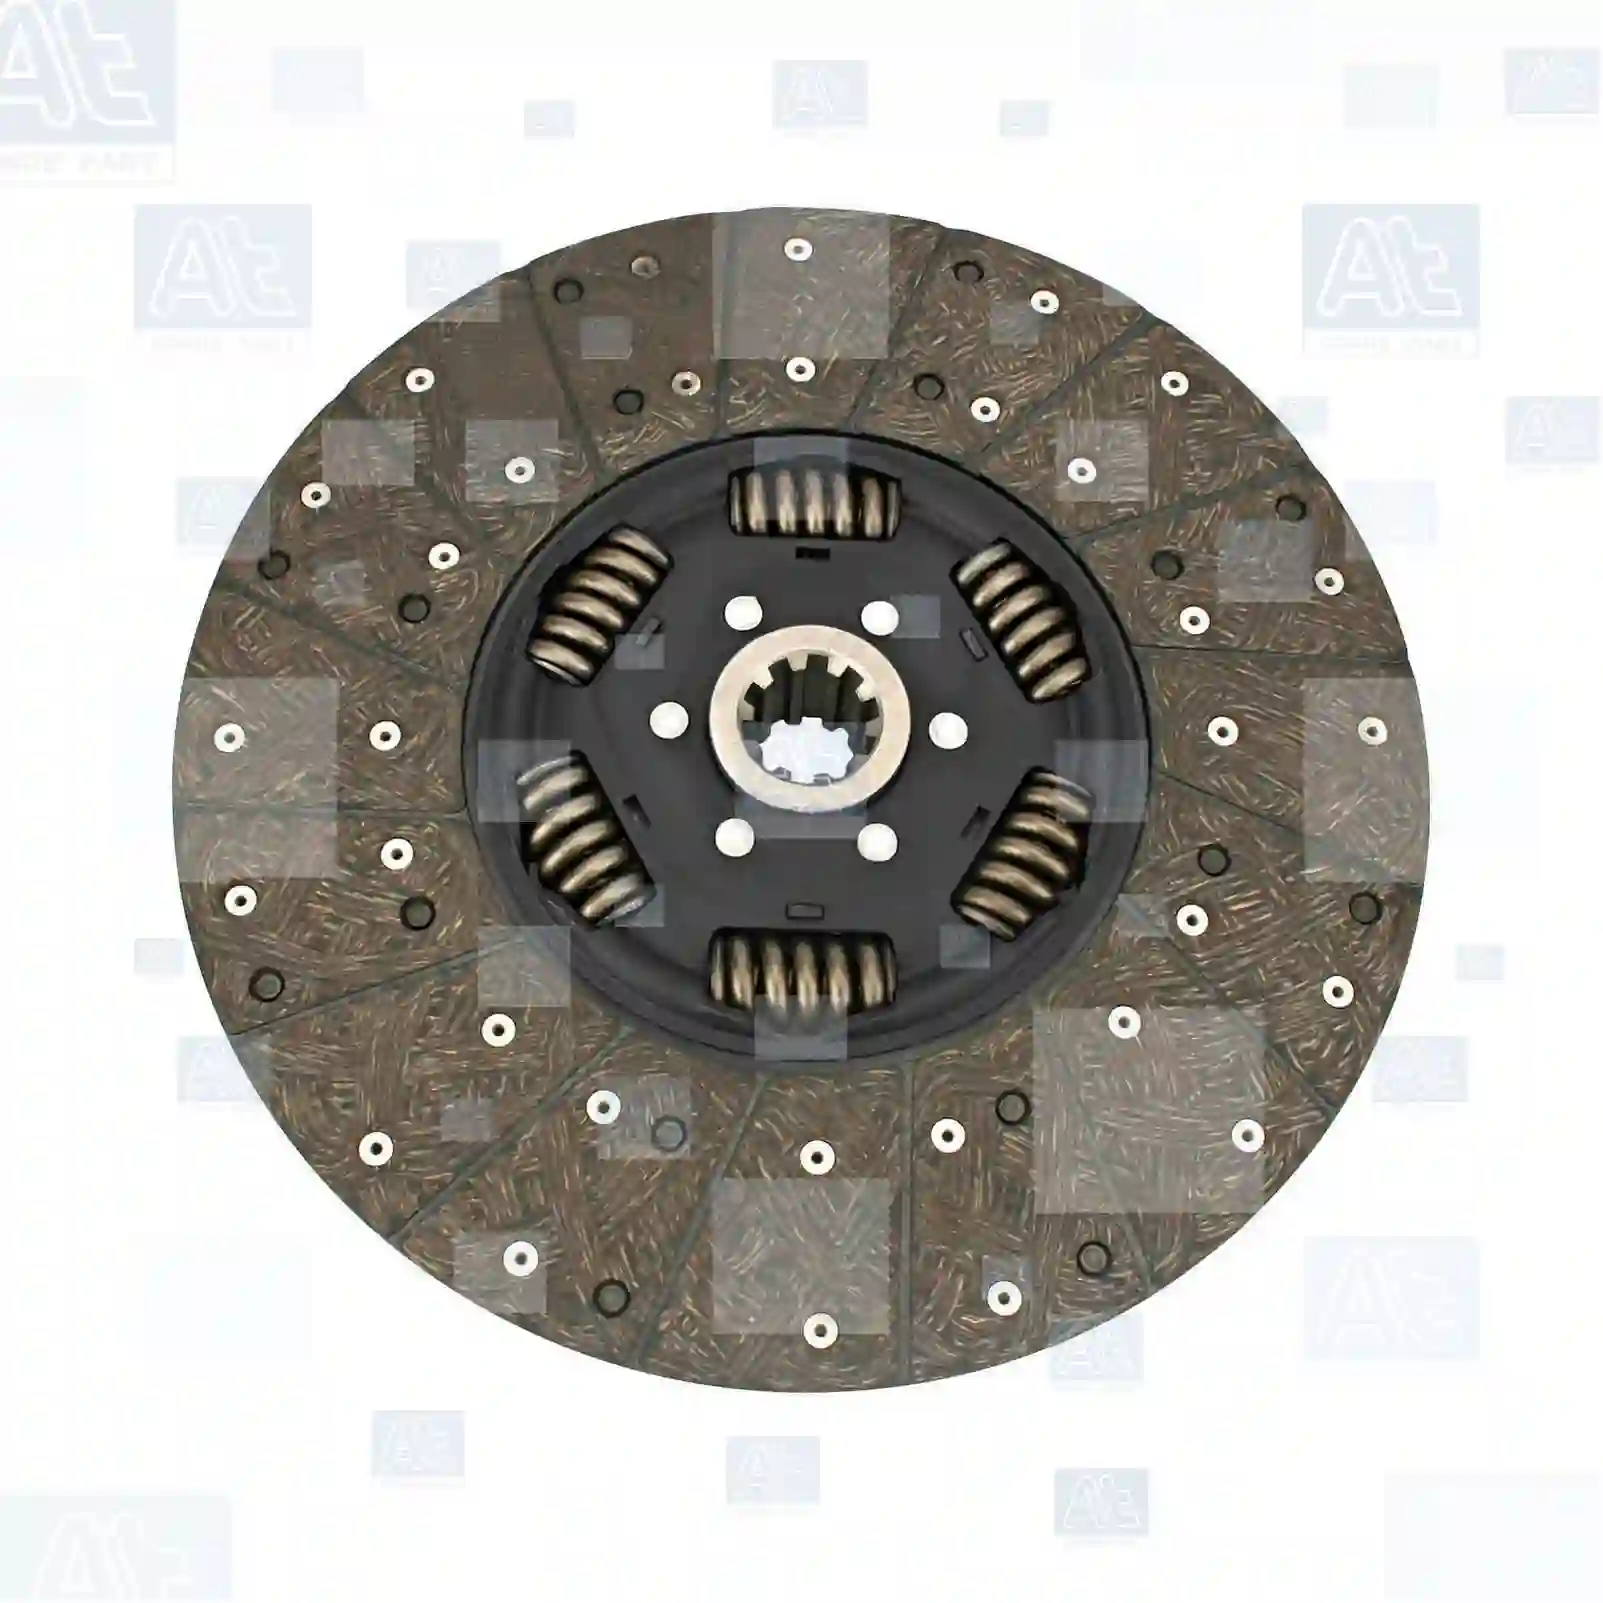 Clutch disc, 77721900, 54RS410141, 1400510, 1400510A, 1400510R, 1409478, ATRA242, ATRB074, 504229170, 81303010411, 81303010449, 81303010450, 81303010452, 81303010453, 81303010468, 81303010469, 81303010470, 81303010490, 81303010491, 81303010492, 81303010519, 81303010520, 81303010529, 81303010556, 81303019411, 81303019450, 81303019468, 81303019492, 81303019520, 81303019529, 81303019556, 30100-LA400 ||  77721900 At Spare Part | Engine, Accelerator Pedal, Camshaft, Connecting Rod, Crankcase, Crankshaft, Cylinder Head, Engine Suspension Mountings, Exhaust Manifold, Exhaust Gas Recirculation, Filter Kits, Flywheel Housing, General Overhaul Kits, Engine, Intake Manifold, Oil Cleaner, Oil Cooler, Oil Filter, Oil Pump, Oil Sump, Piston & Liner, Sensor & Switch, Timing Case, Turbocharger, Cooling System, Belt Tensioner, Coolant Filter, Coolant Pipe, Corrosion Prevention Agent, Drive, Expansion Tank, Fan, Intercooler, Monitors & Gauges, Radiator, Thermostat, V-Belt / Timing belt, Water Pump, Fuel System, Electronical Injector Unit, Feed Pump, Fuel Filter, cpl., Fuel Gauge Sender,  Fuel Line, Fuel Pump, Fuel Tank, Injection Line Kit, Injection Pump, Exhaust System, Clutch & Pedal, Gearbox, Propeller Shaft, Axles, Brake System, Hubs & Wheels, Suspension, Leaf Spring, Universal Parts / Accessories, Steering, Electrical System, Cabin Clutch disc, 77721900, 54RS410141, 1400510, 1400510A, 1400510R, 1409478, ATRA242, ATRB074, 504229170, 81303010411, 81303010449, 81303010450, 81303010452, 81303010453, 81303010468, 81303010469, 81303010470, 81303010490, 81303010491, 81303010492, 81303010519, 81303010520, 81303010529, 81303010556, 81303019411, 81303019450, 81303019468, 81303019492, 81303019520, 81303019529, 81303019556, 30100-LA400 ||  77721900 At Spare Part | Engine, Accelerator Pedal, Camshaft, Connecting Rod, Crankcase, Crankshaft, Cylinder Head, Engine Suspension Mountings, Exhaust Manifold, Exhaust Gas Recirculation, Filter Kits, Flywheel Housing, General Overhaul Kits, Engine, Intake Manifold, Oil Cleaner, Oil Cooler, Oil Filter, Oil Pump, Oil Sump, Piston & Liner, Sensor & Switch, Timing Case, Turbocharger, Cooling System, Belt Tensioner, Coolant Filter, Coolant Pipe, Corrosion Prevention Agent, Drive, Expansion Tank, Fan, Intercooler, Monitors & Gauges, Radiator, Thermostat, V-Belt / Timing belt, Water Pump, Fuel System, Electronical Injector Unit, Feed Pump, Fuel Filter, cpl., Fuel Gauge Sender,  Fuel Line, Fuel Pump, Fuel Tank, Injection Line Kit, Injection Pump, Exhaust System, Clutch & Pedal, Gearbox, Propeller Shaft, Axles, Brake System, Hubs & Wheels, Suspension, Leaf Spring, Universal Parts / Accessories, Steering, Electrical System, Cabin